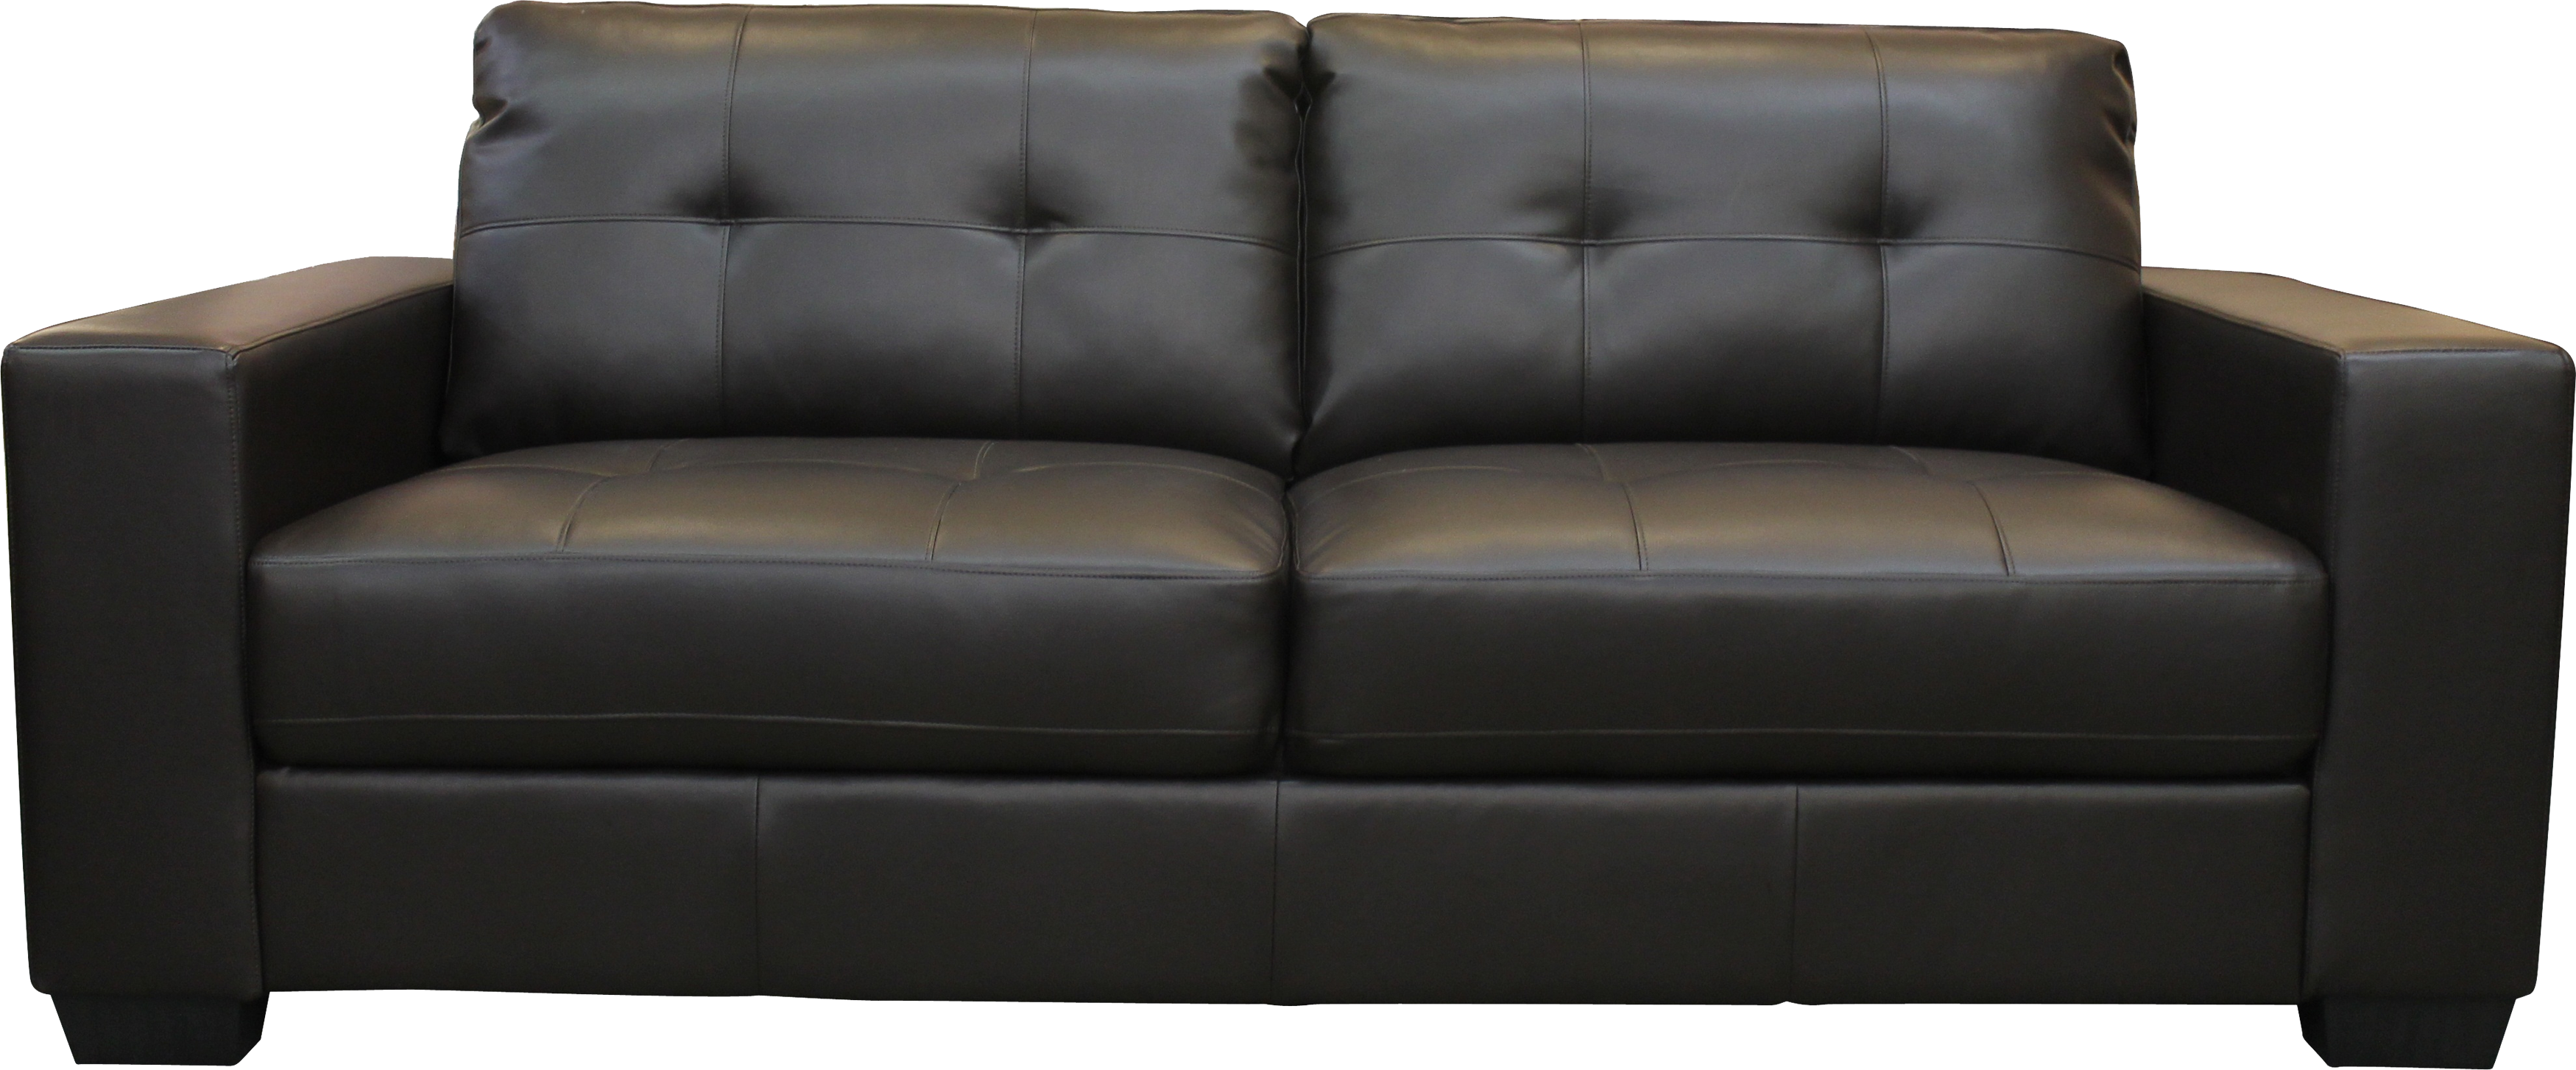 Sofá chaise longue PNG Pic